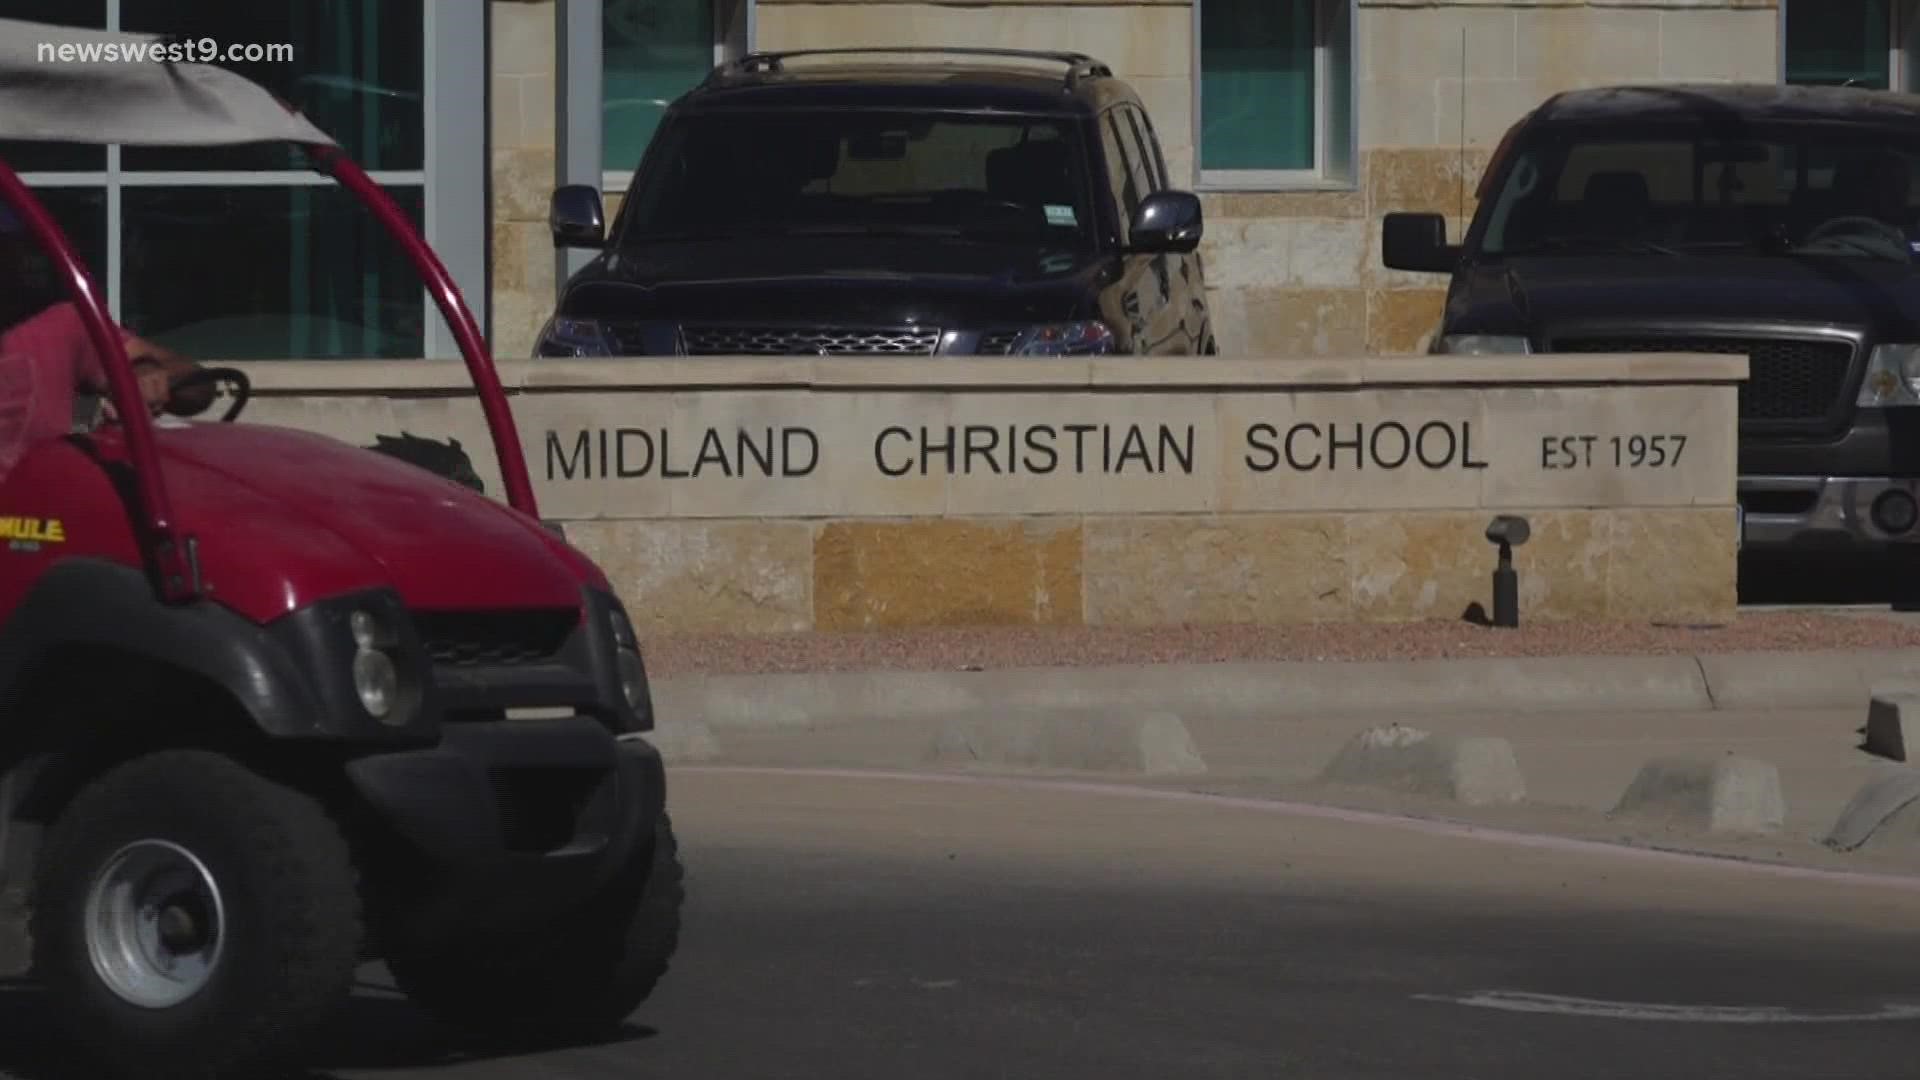 A former Midland Christian student talked about her thoughts on the situation. Due to the sensitivity of the incident she's chosen to remain anonymous.